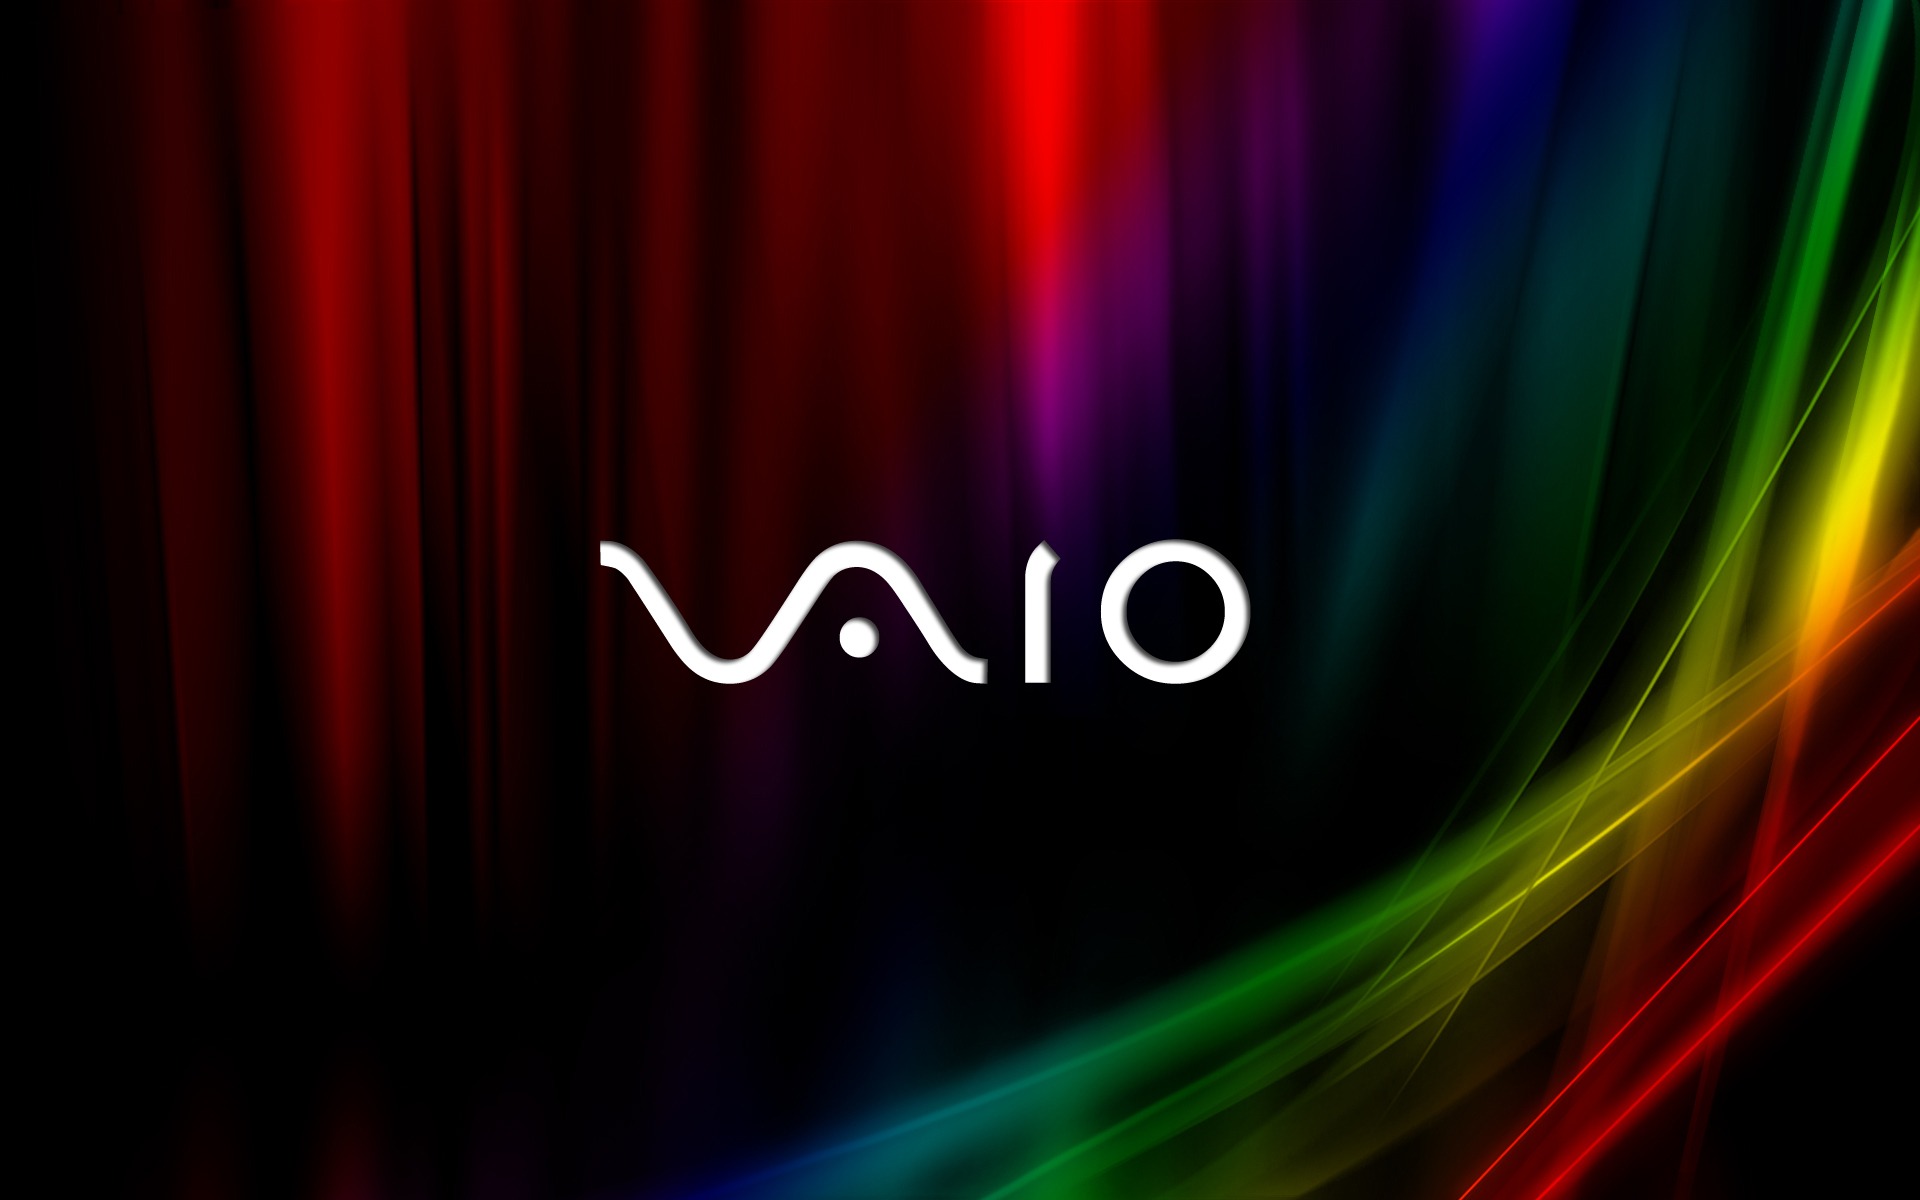 To HD Sony Vaio Wallpaper Background For